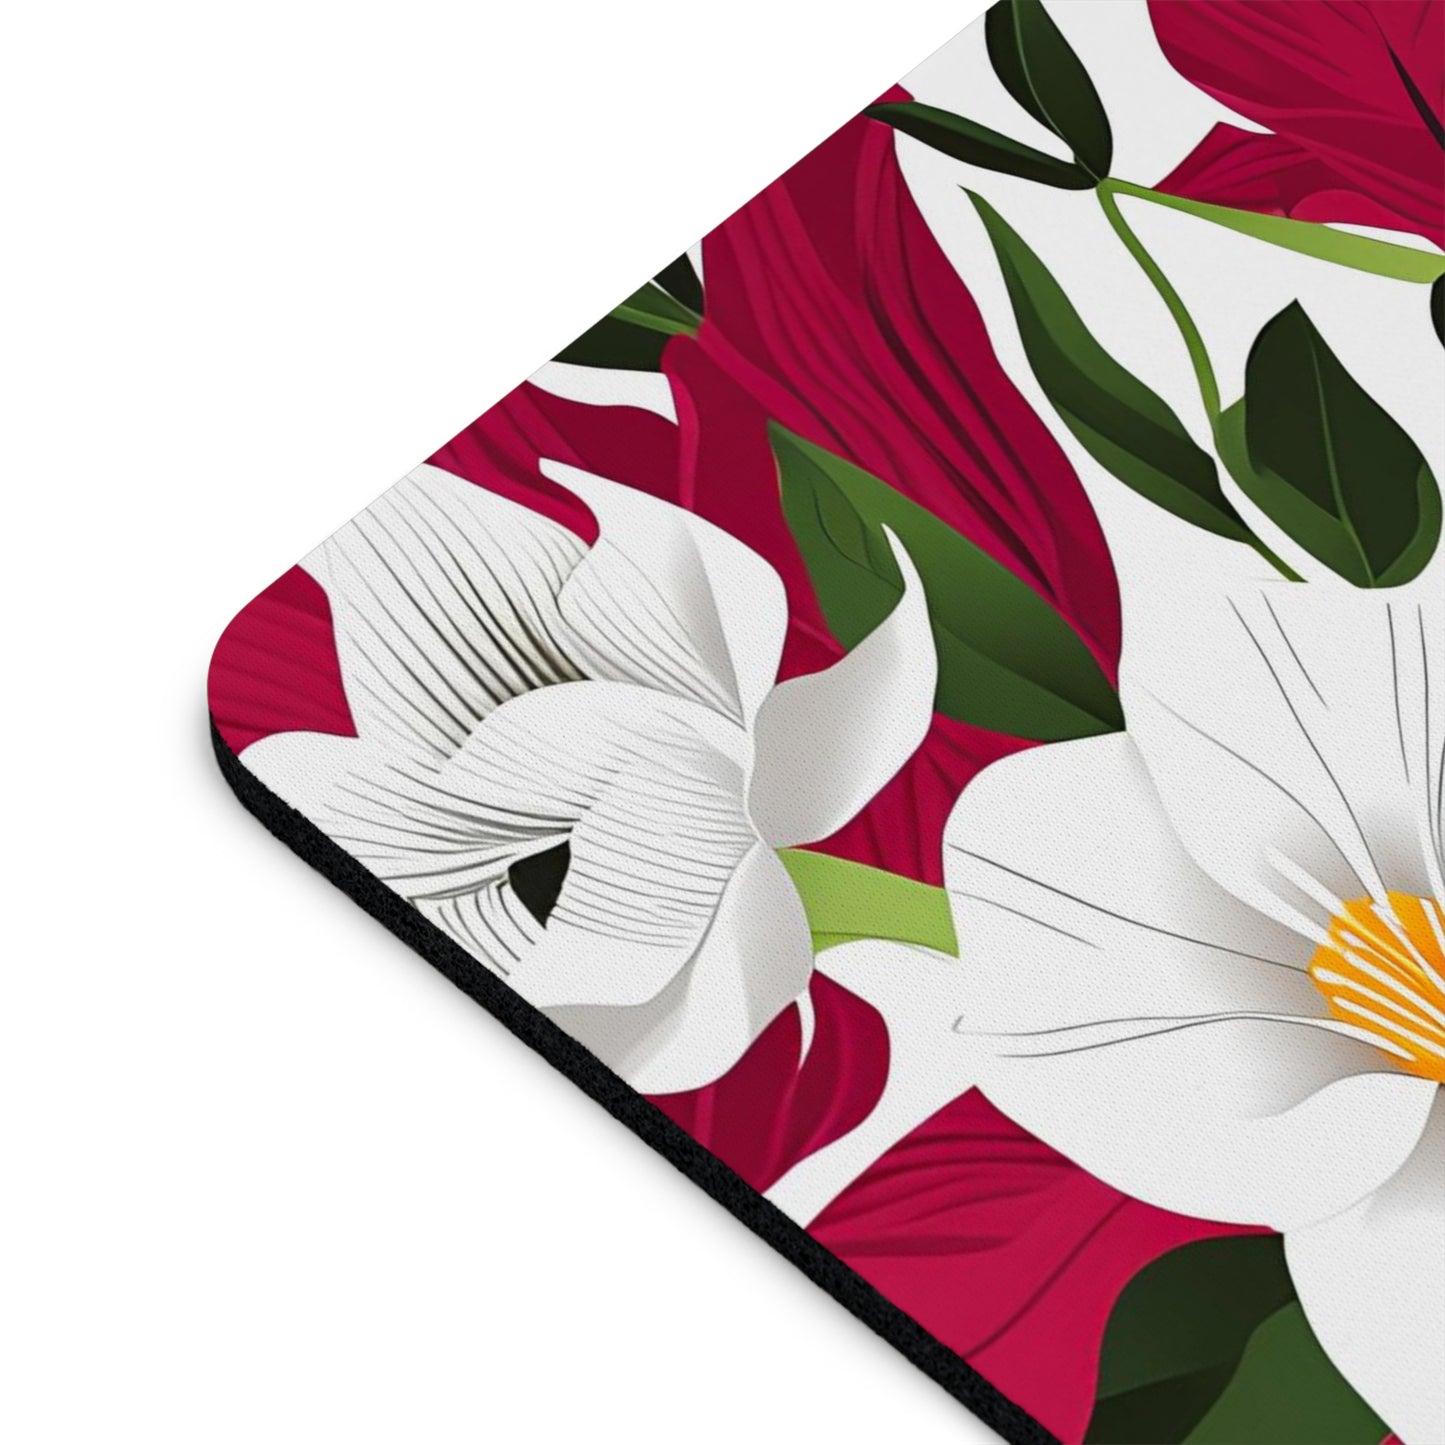 Computer Mouse Pad with Non-slip rubber bottom for Home or Office - White Flowers on Red